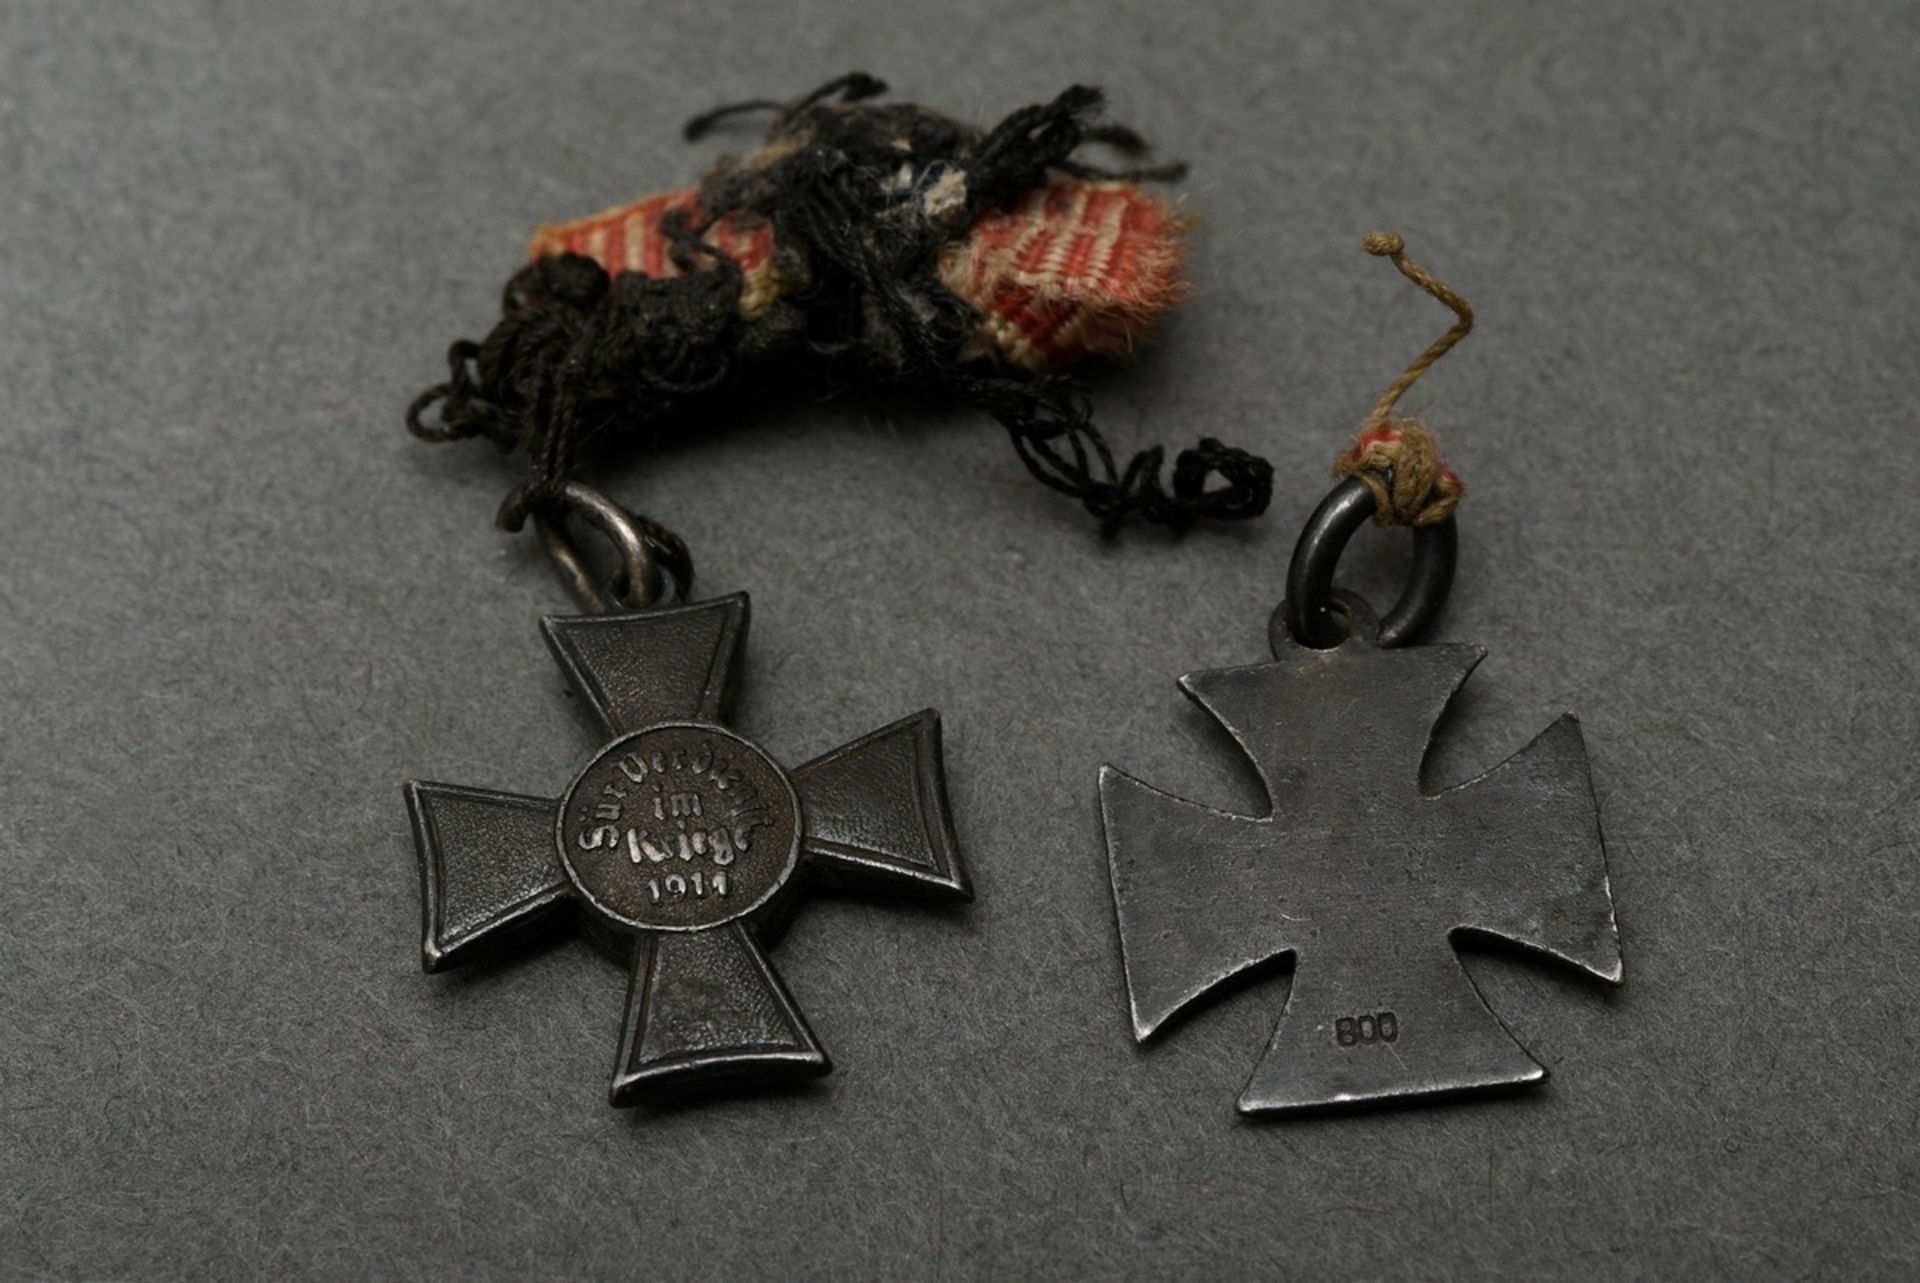 2 Various medal miniatures First World War: Iron Cross 1914 (silver 800 enamelled, ca. 2x1,5cm) and - Image 2 of 4